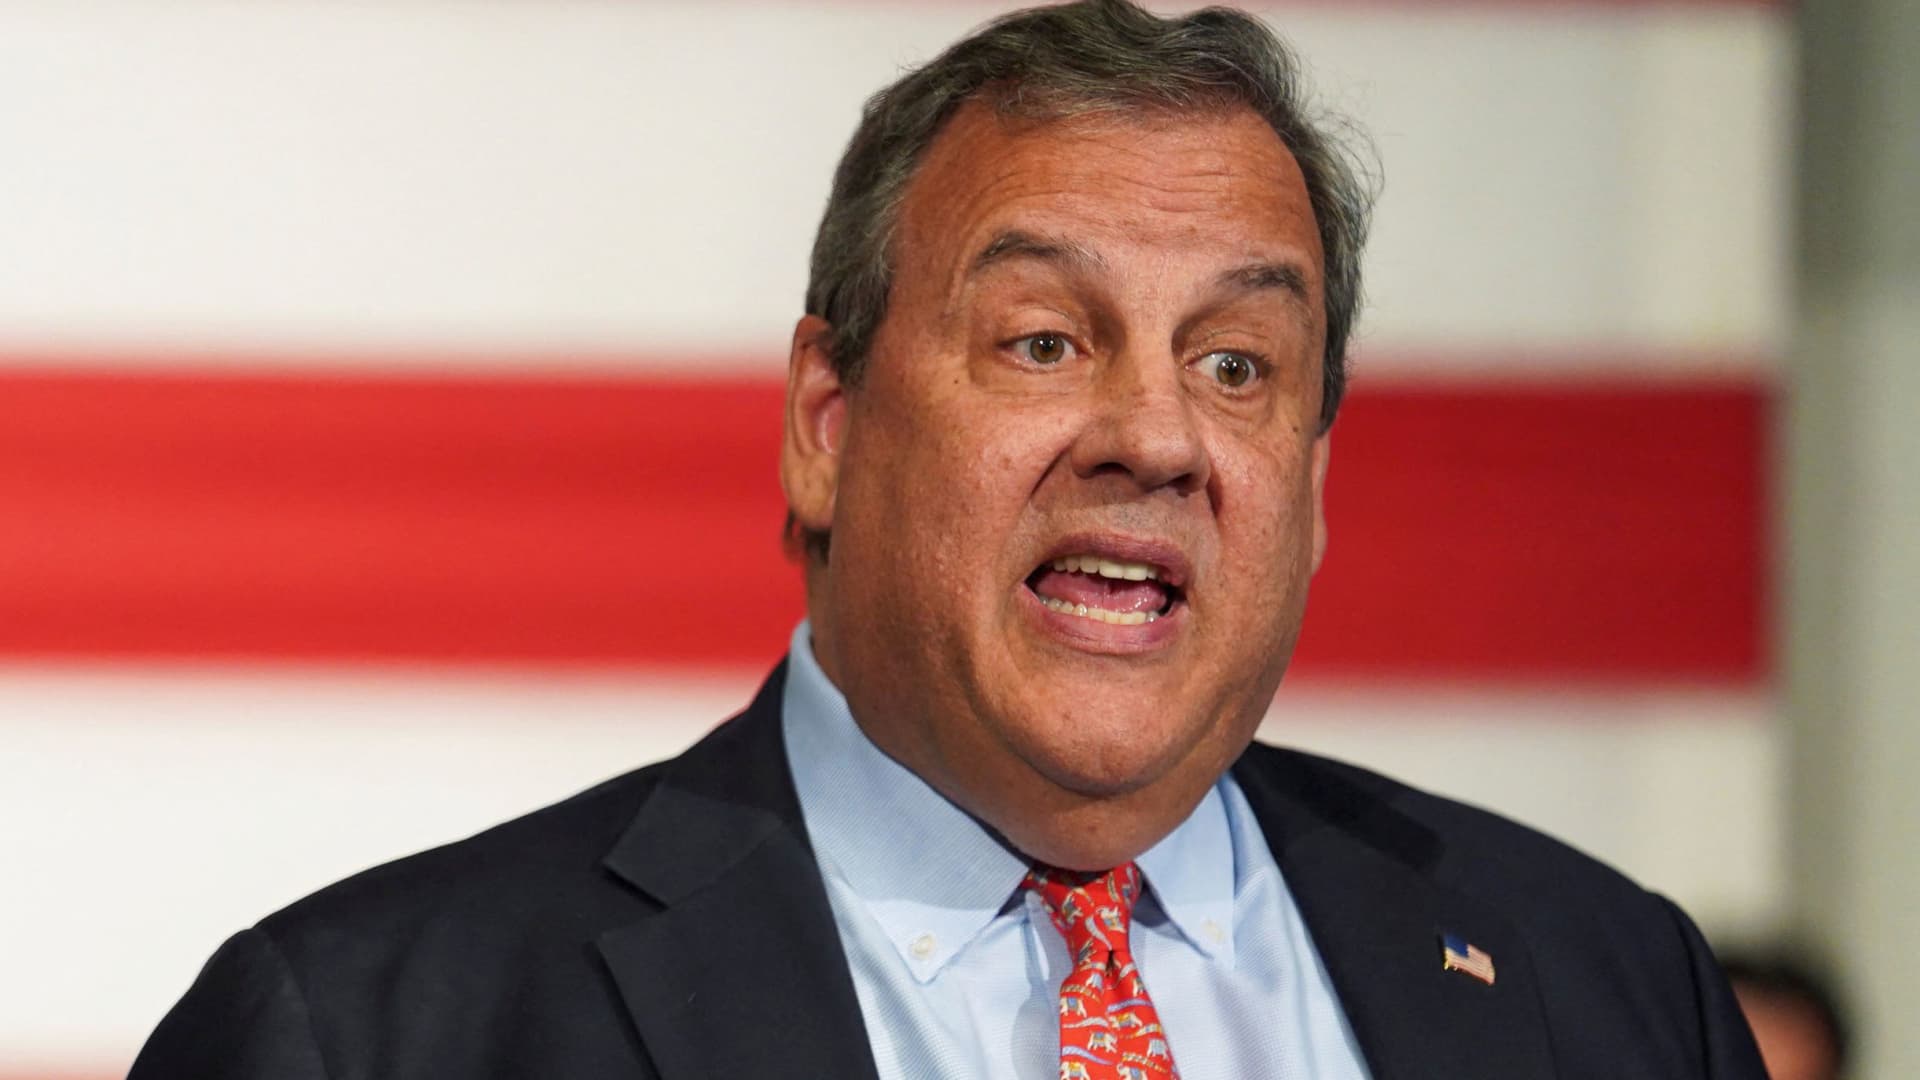 Chris Christie lures big donors as he takes on Trump, while billionaire ally Cohen sits out